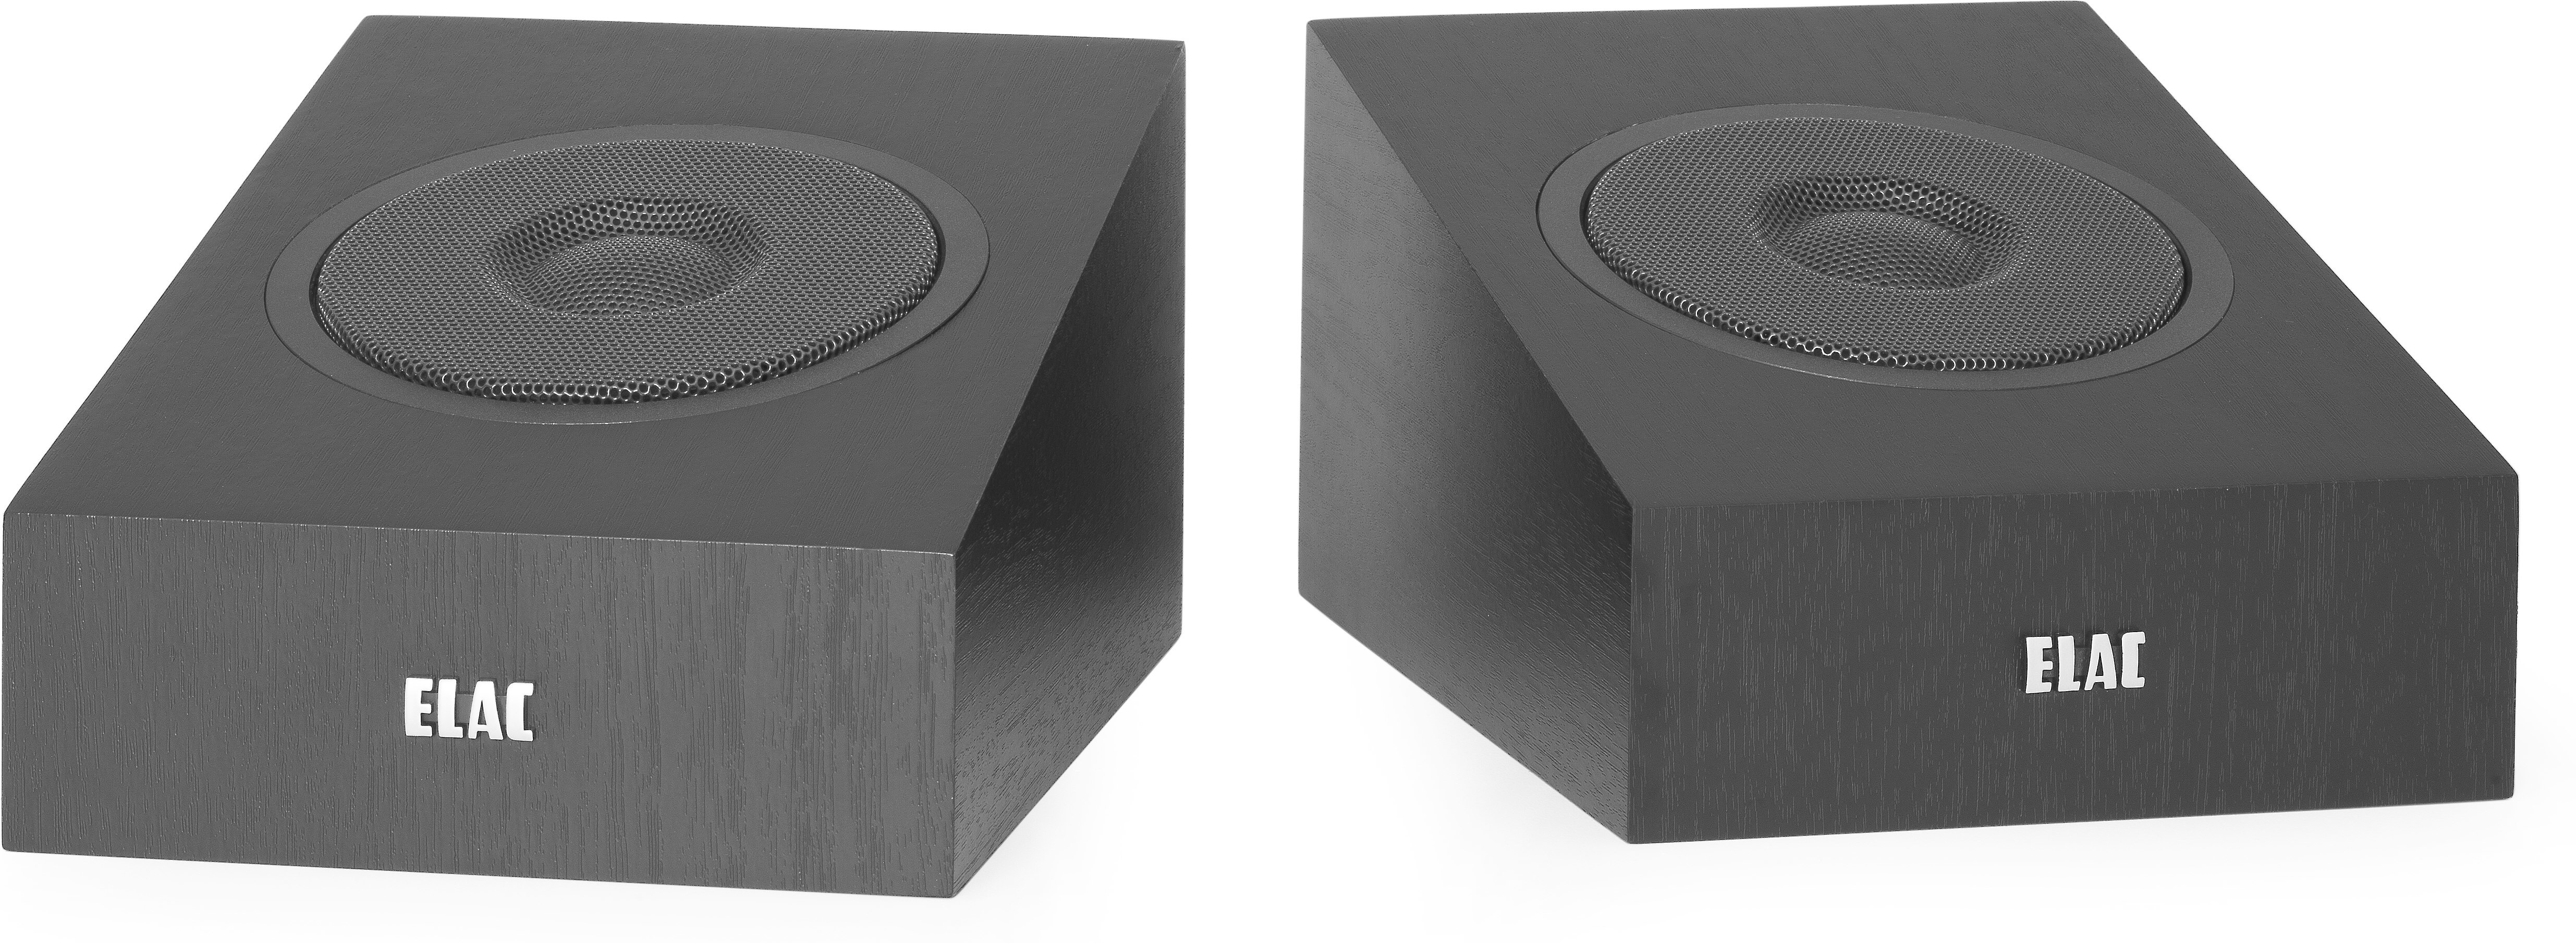 Customer Reviews: ELAC Debut 2.0 A4.2 Dolby Atmos® enabled